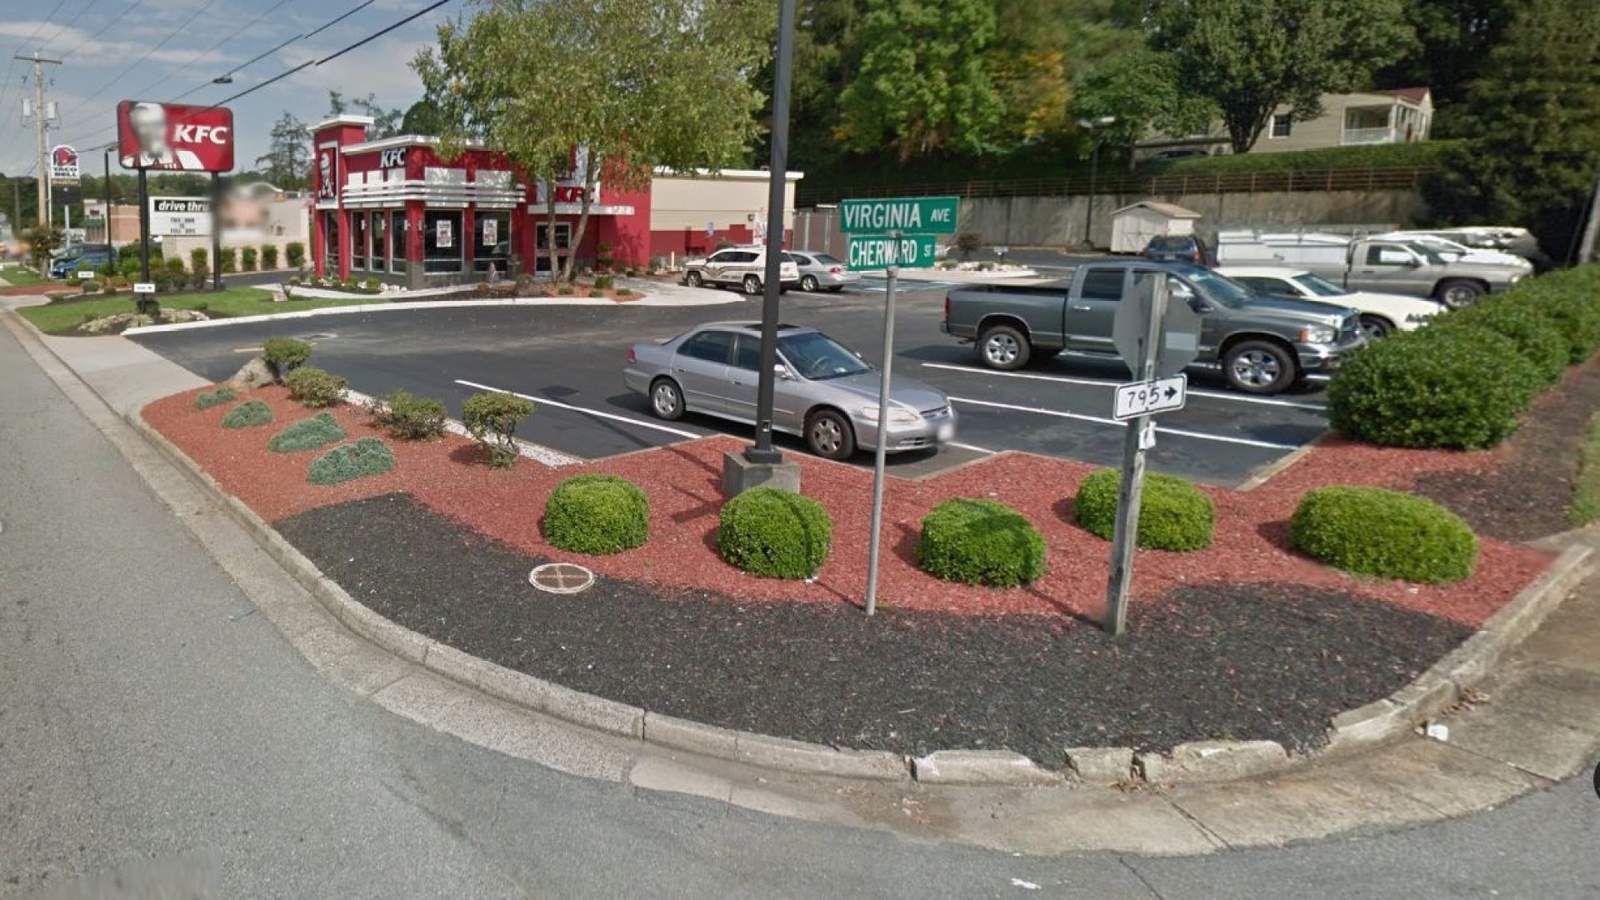 No foul play suspected after body found behind Henry County KFC